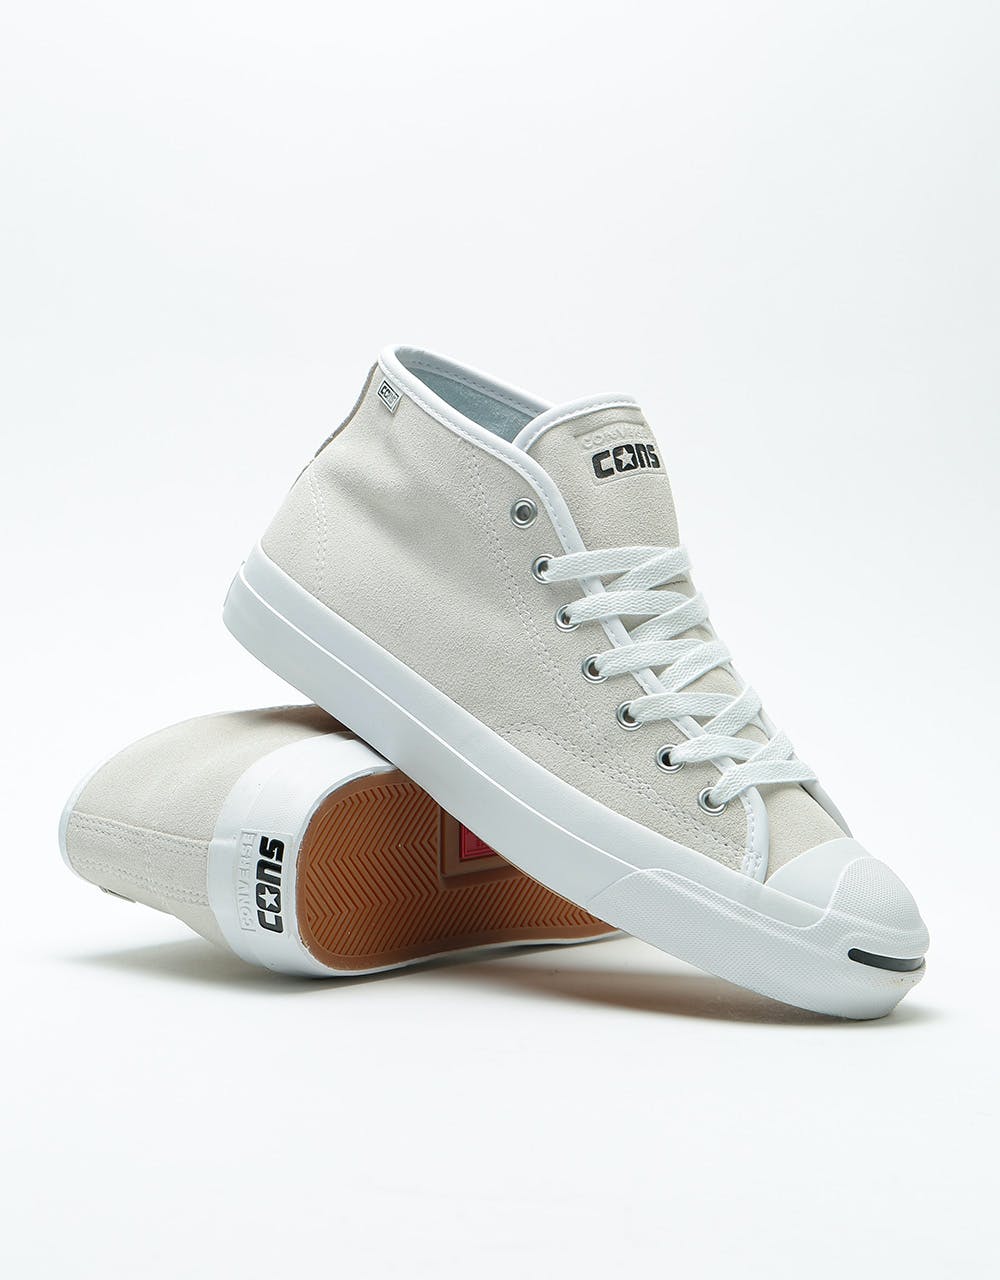 Converse Jack Purcell Pro Mid Suede Skate Shoes - White/White/White